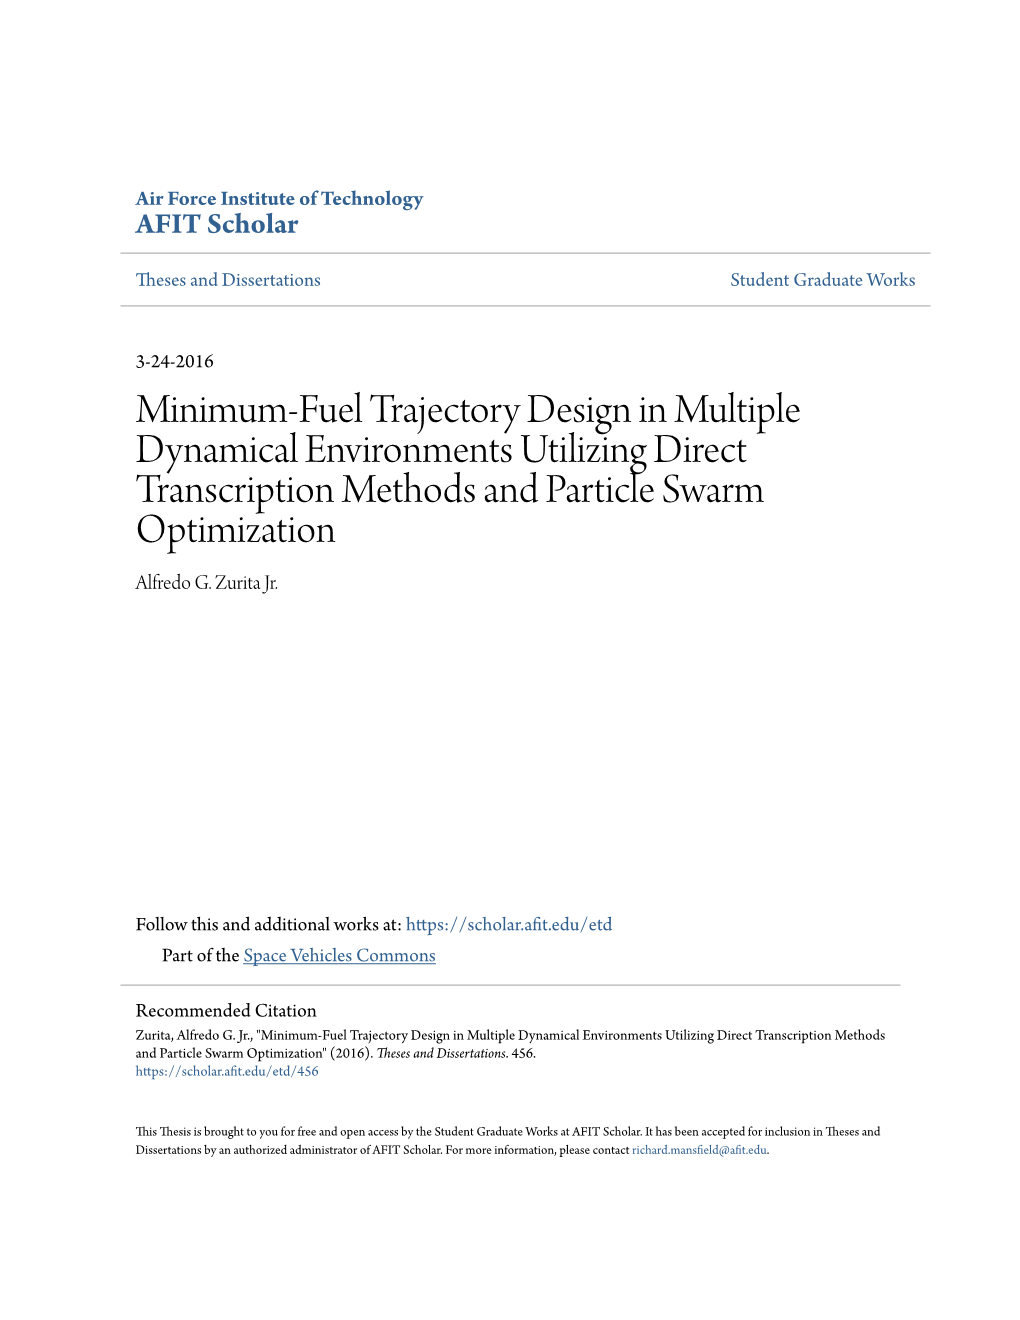 Minimum-Fuel Trajectory Design in Multiple Dynamical Environments Utilizing Direct Transcription Methods and Particle Swarm Optimization Alfredo G